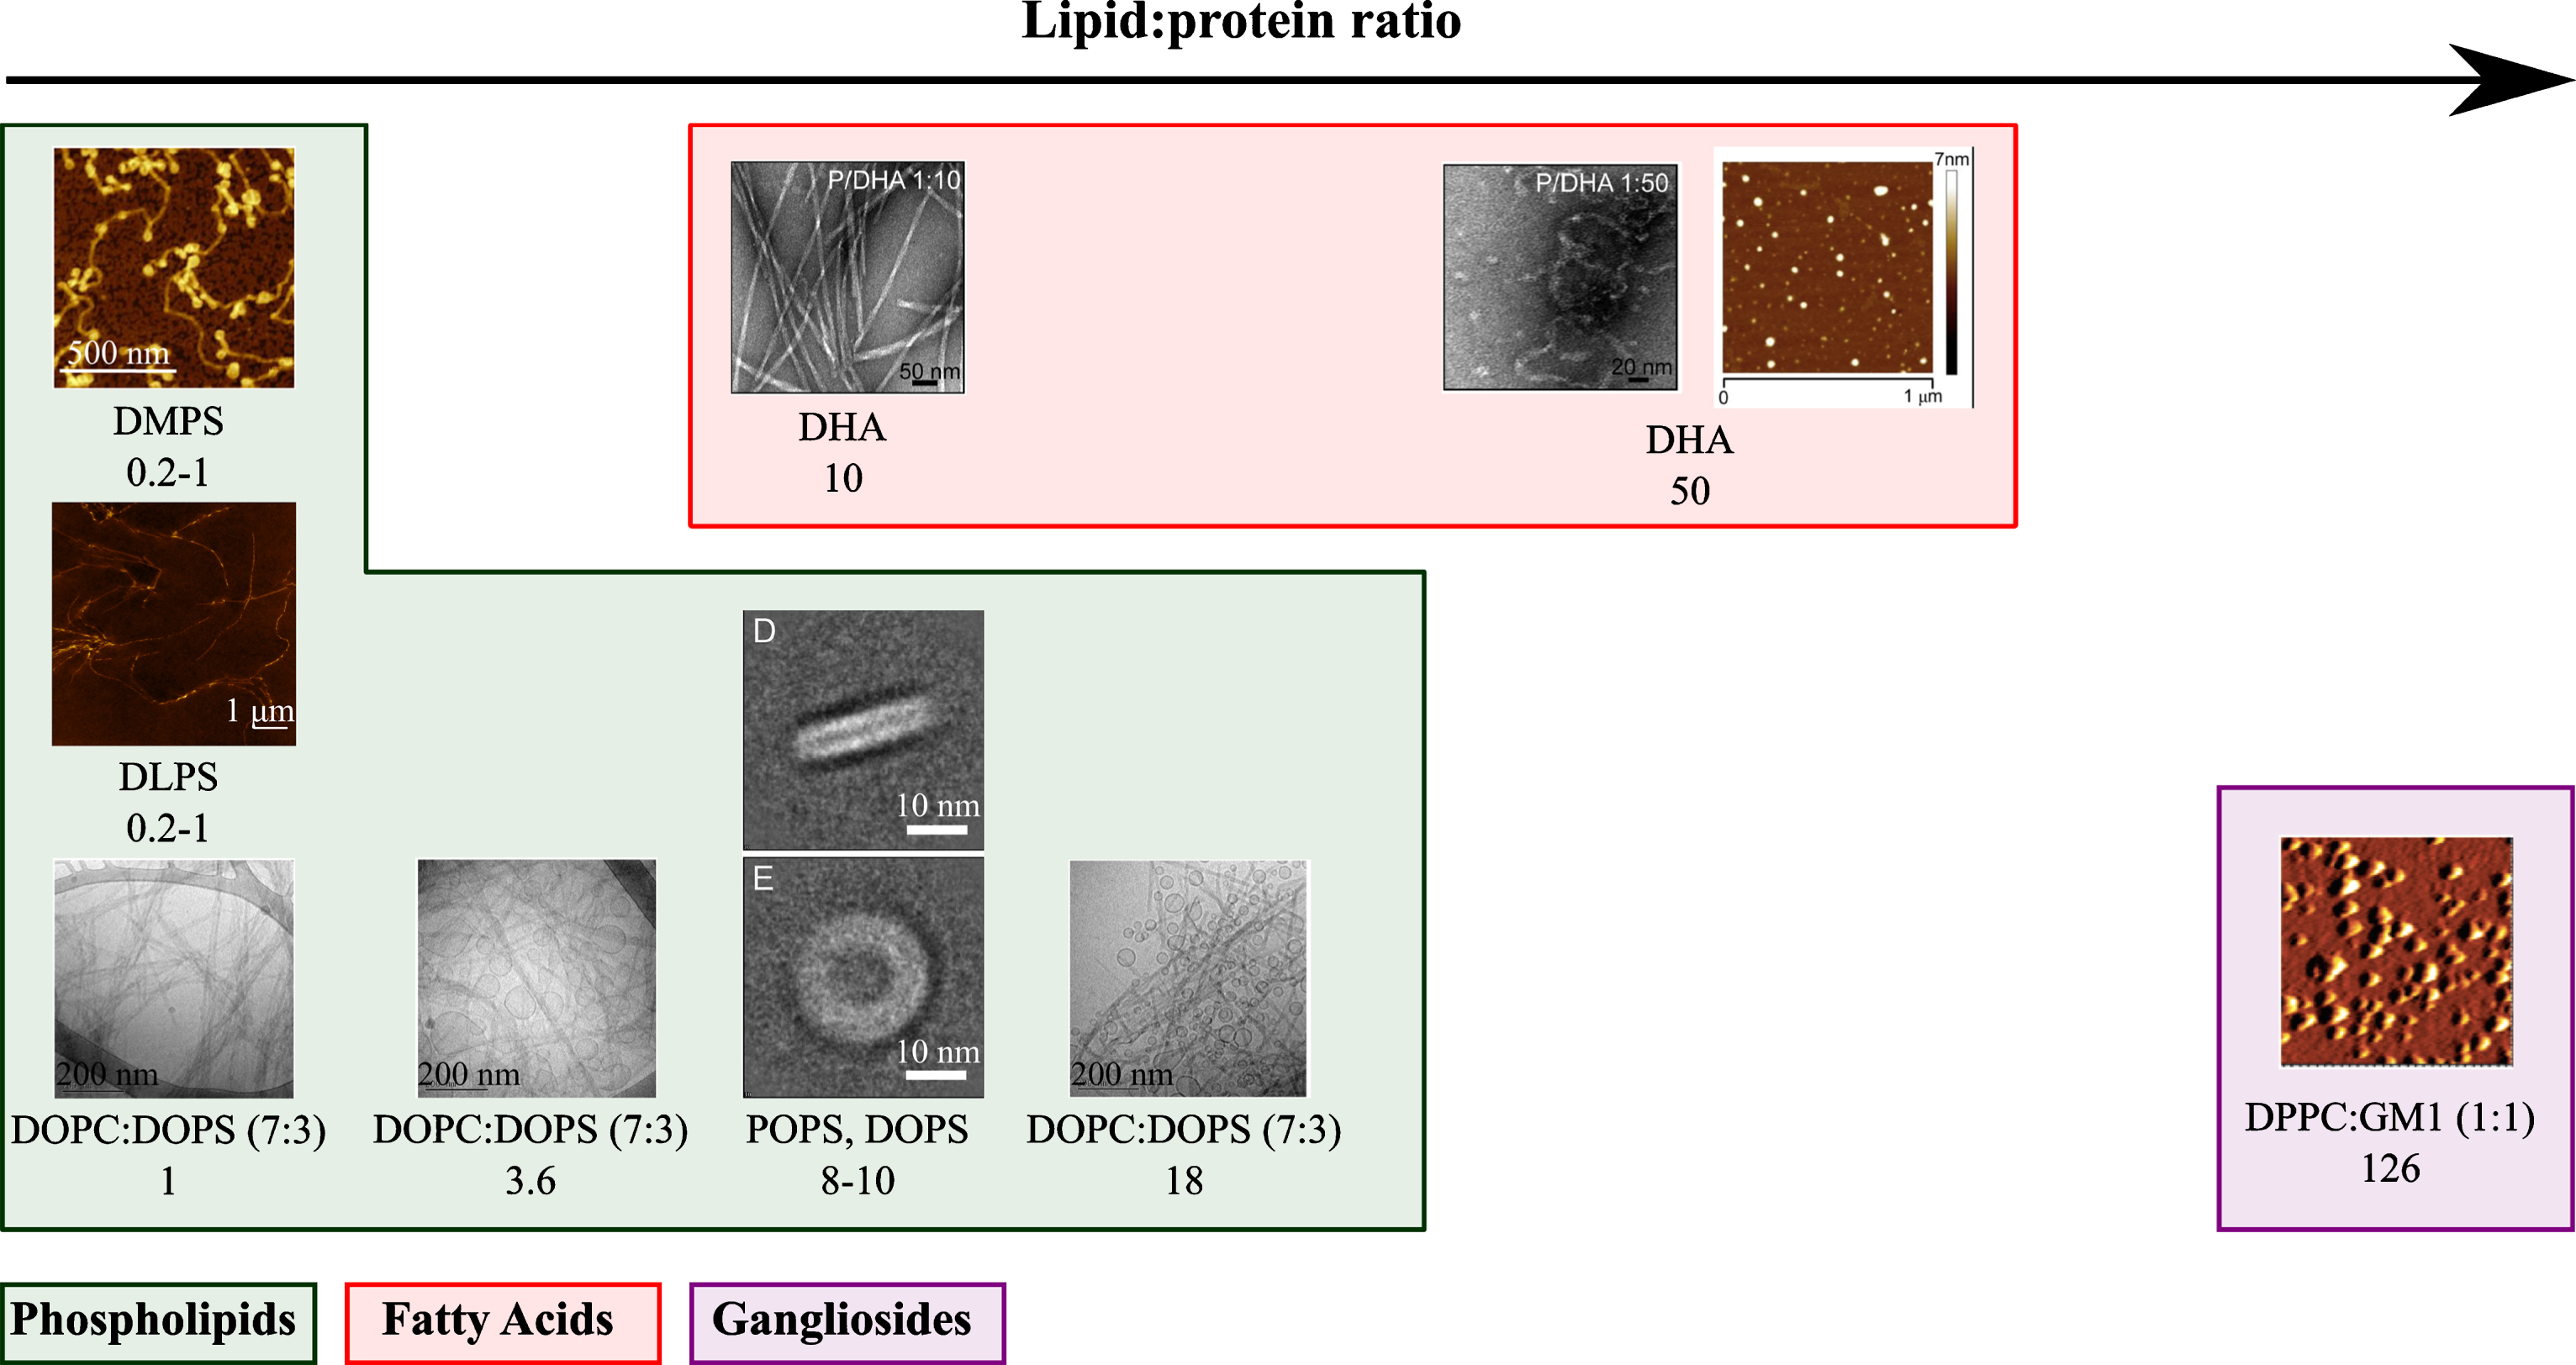 Representative structures that α-synuclein can form when the recombinant protein was incubated in the presence of lipids at different L:P ratios. For each protein-lipid system, the L:P (M:M) ratio and the lipid composition are indicated. The atomic force microscopy and electron microscopy images were adapted from [19, 28, 37, 38, 50, 55].